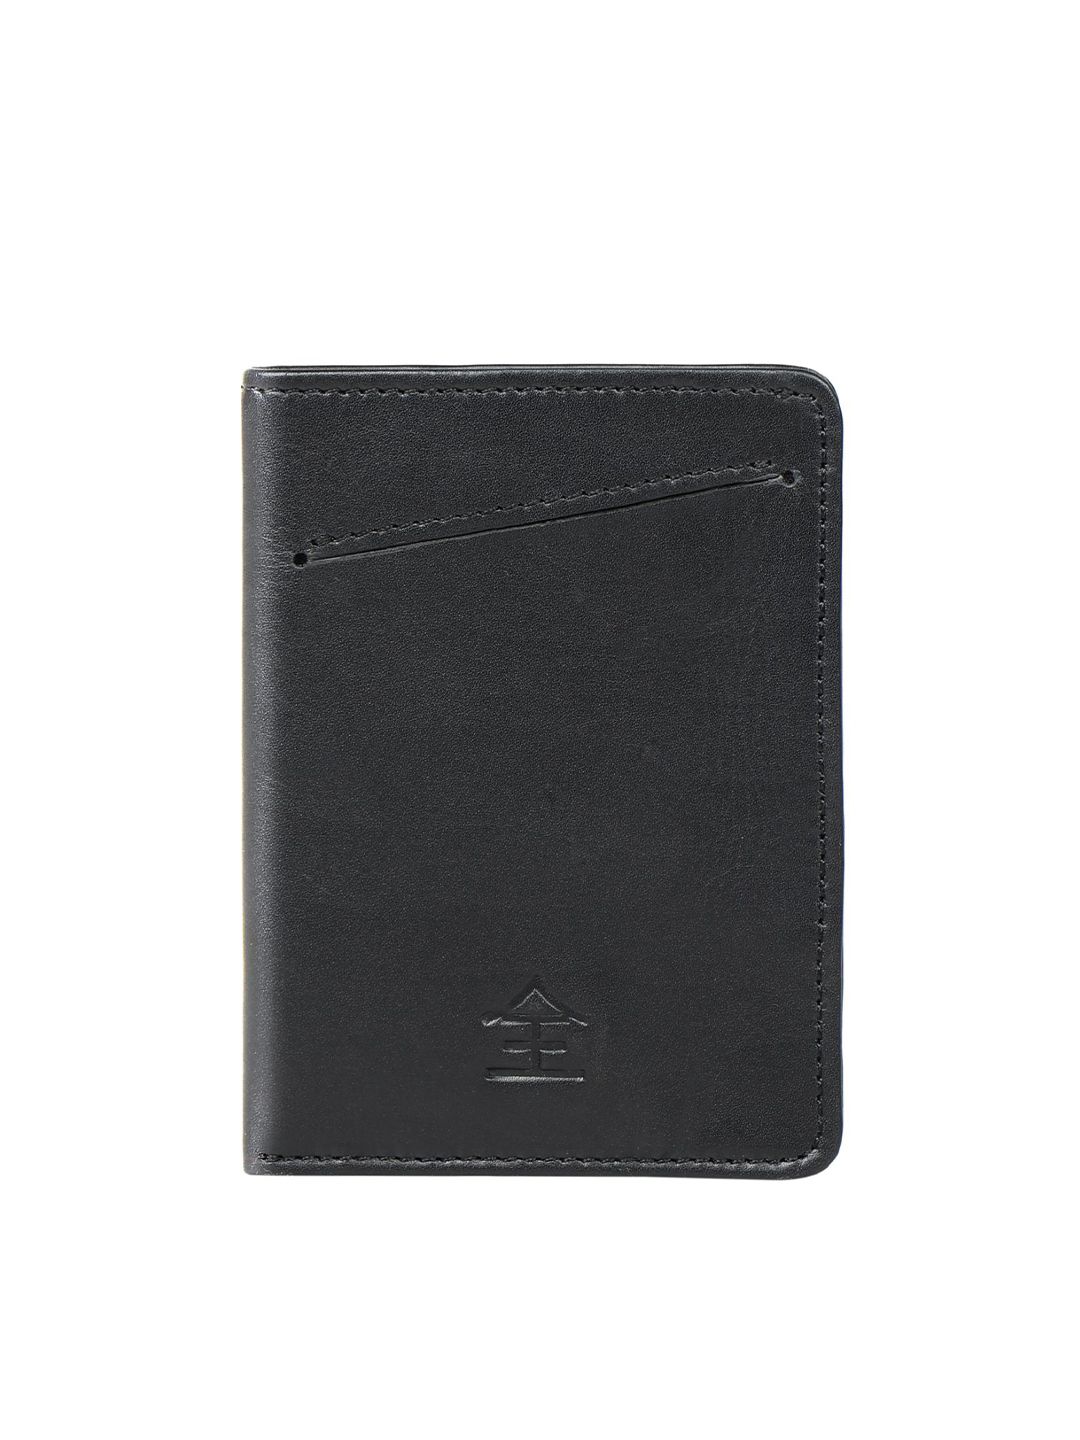 Hidesign Women Black Leather Two Fold Wallet Price in India